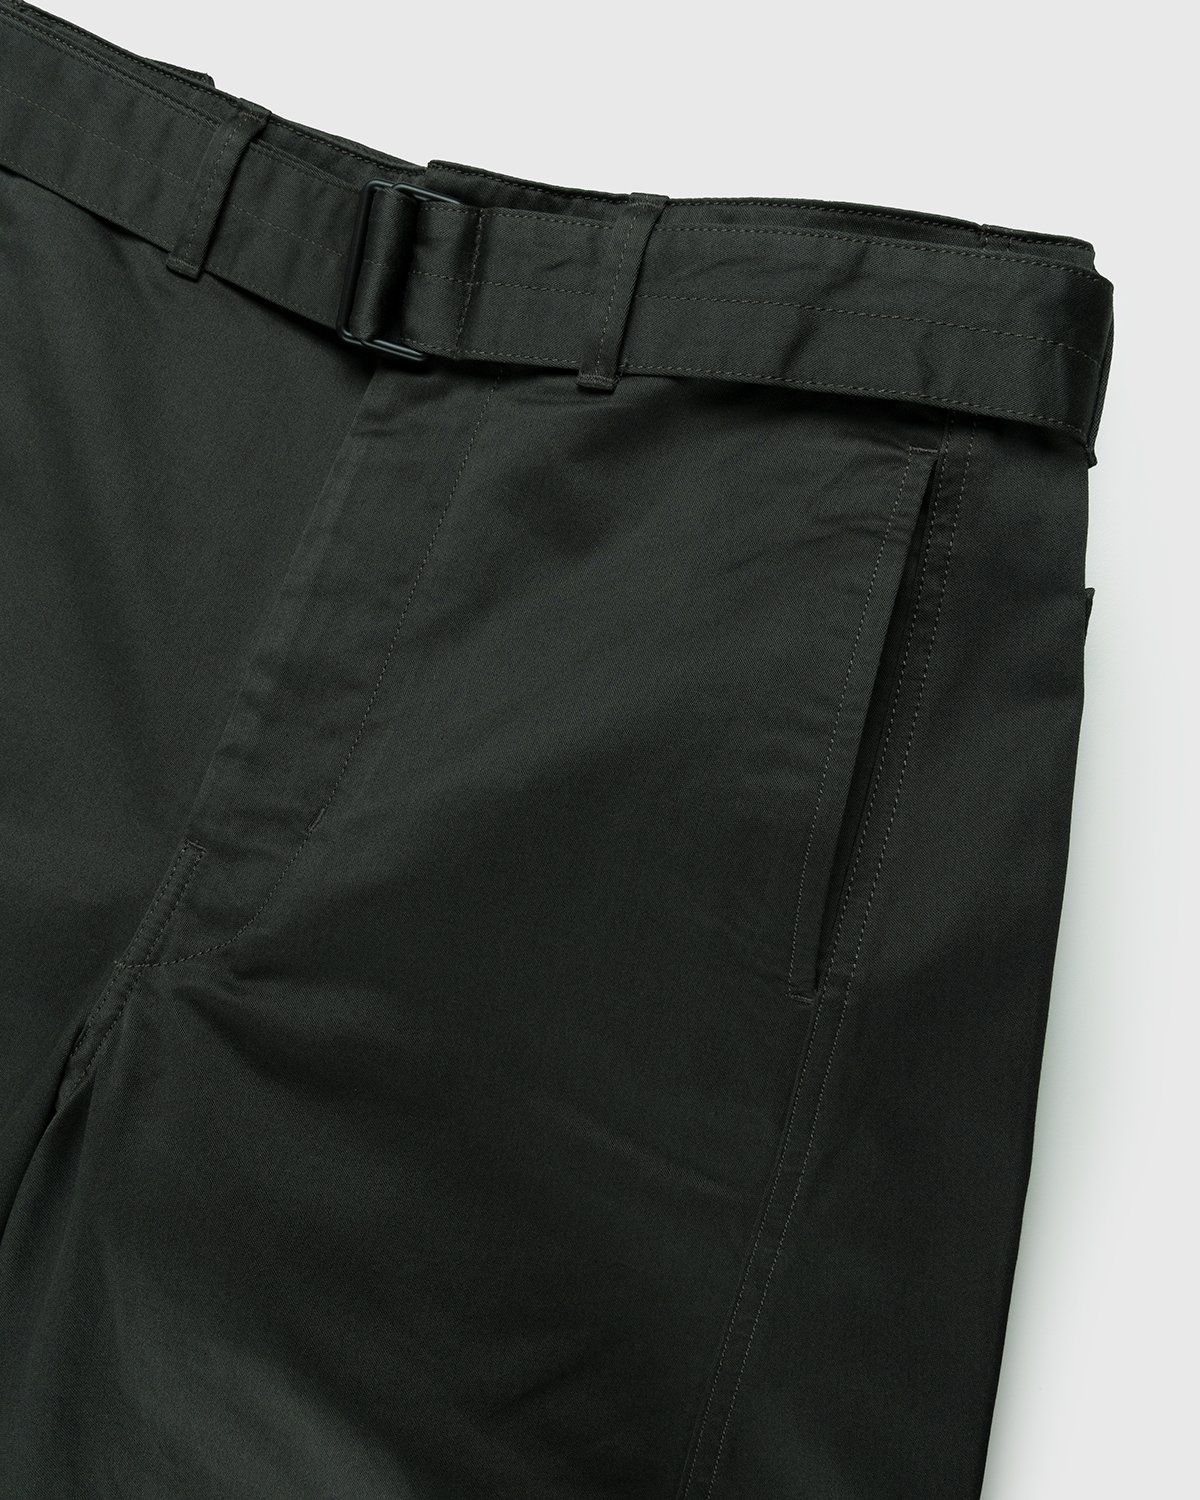 Lemaire – Twisted Belted Pants Dark Slate Green - Pants - Grey - Image 4